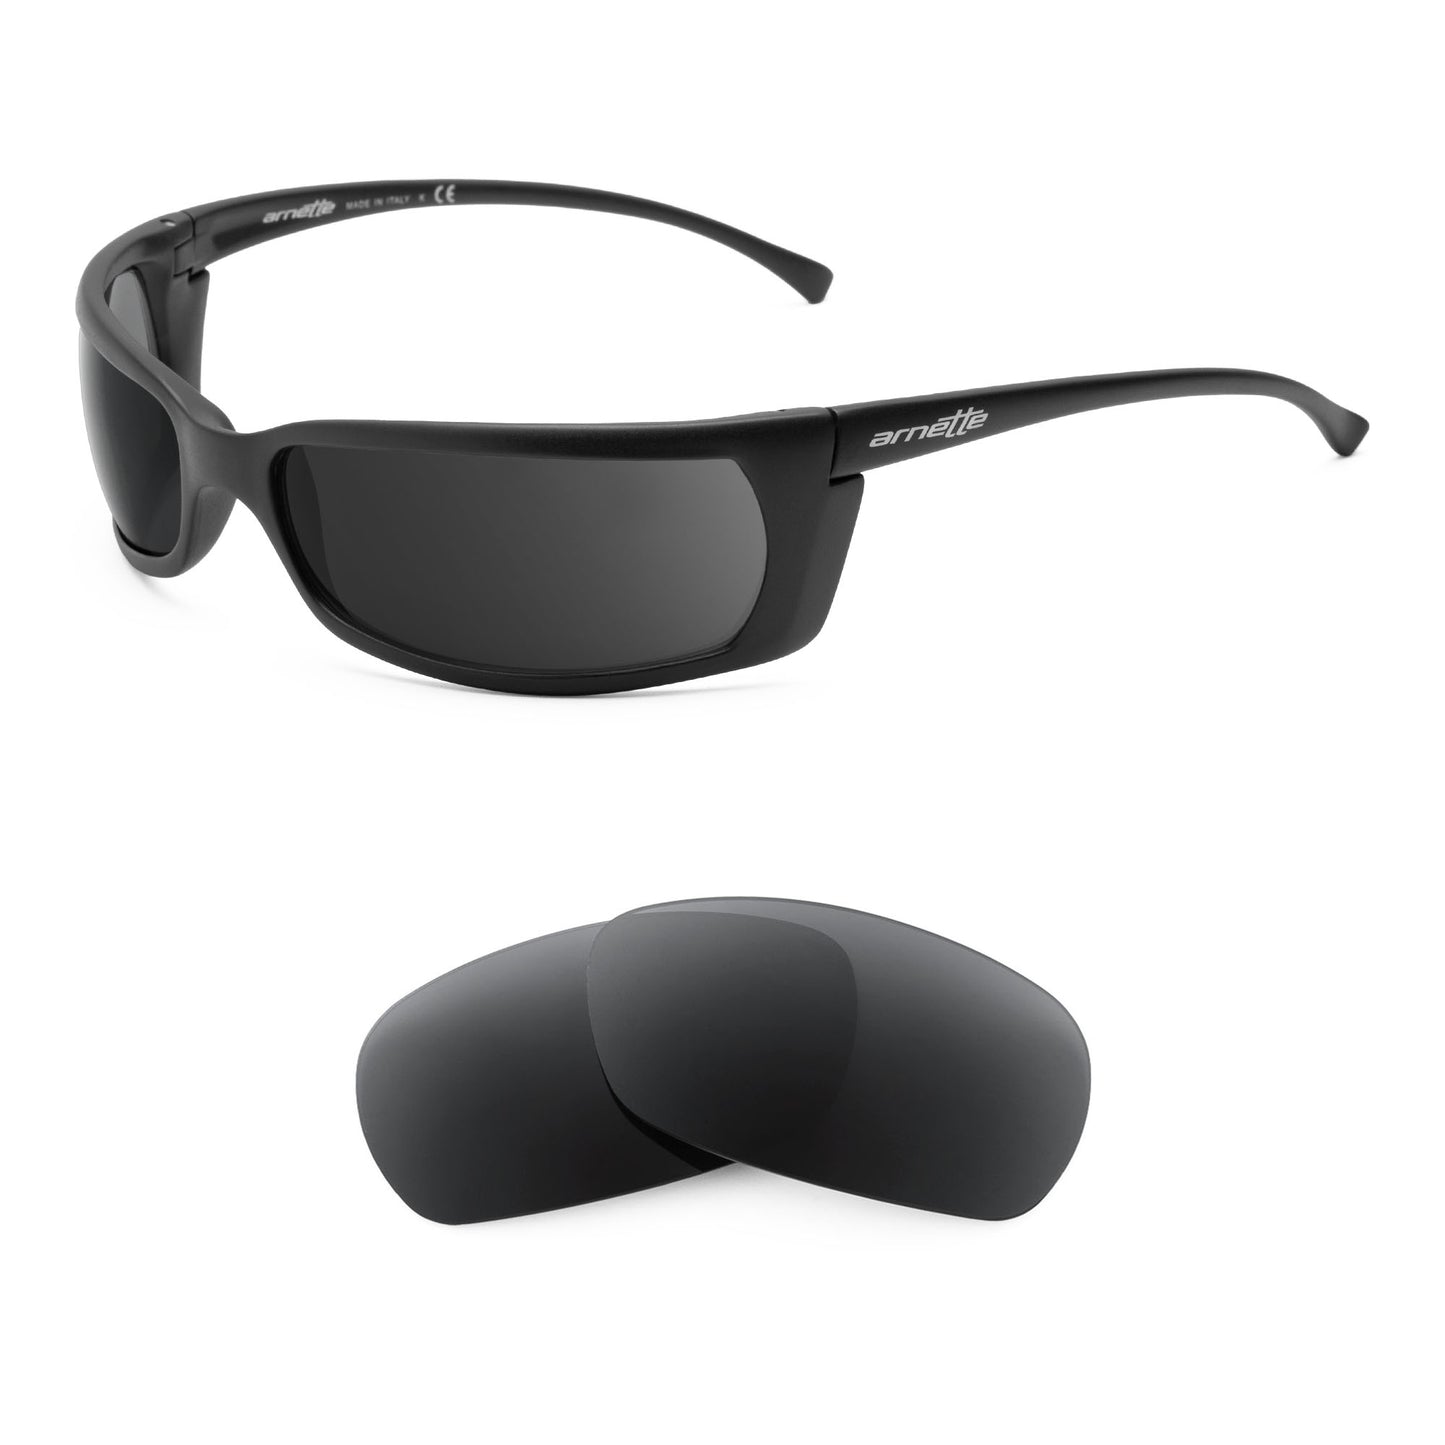 Arnette Slide AN4007 sunglasses with replacement lenses